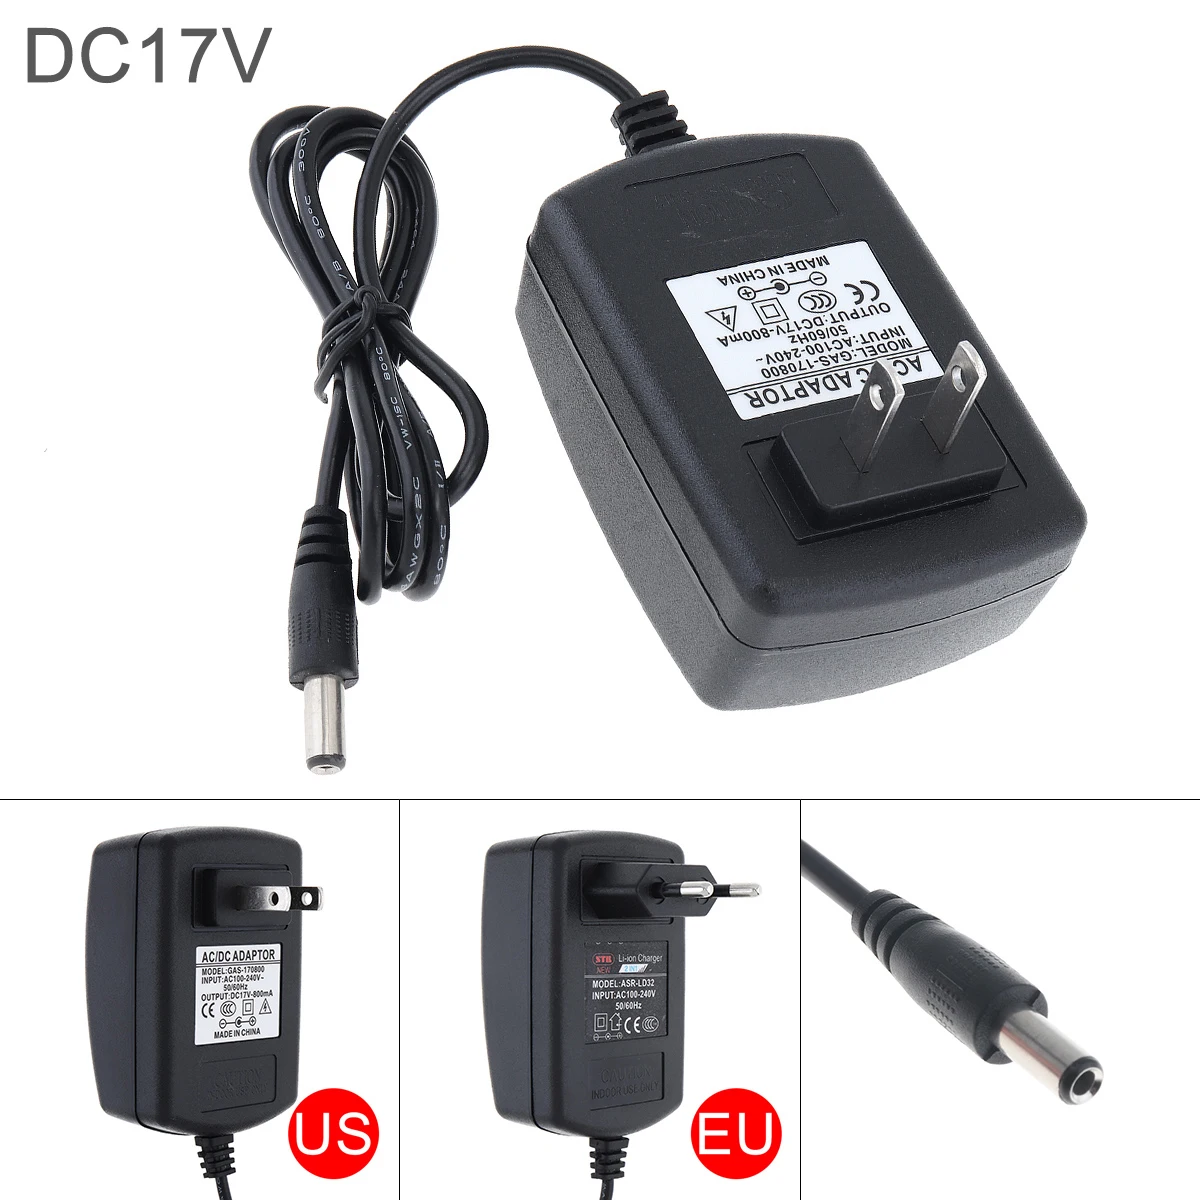 80cm Universal DC 16.8-17V Lithium Battery Rechargeable Charger 100-240V Power Supply for Lithium Electrical Drill Screwdriver new 25v 6800mah universal rechargeable lithium battery for power tools electric screwdriver electric drill li ion battery